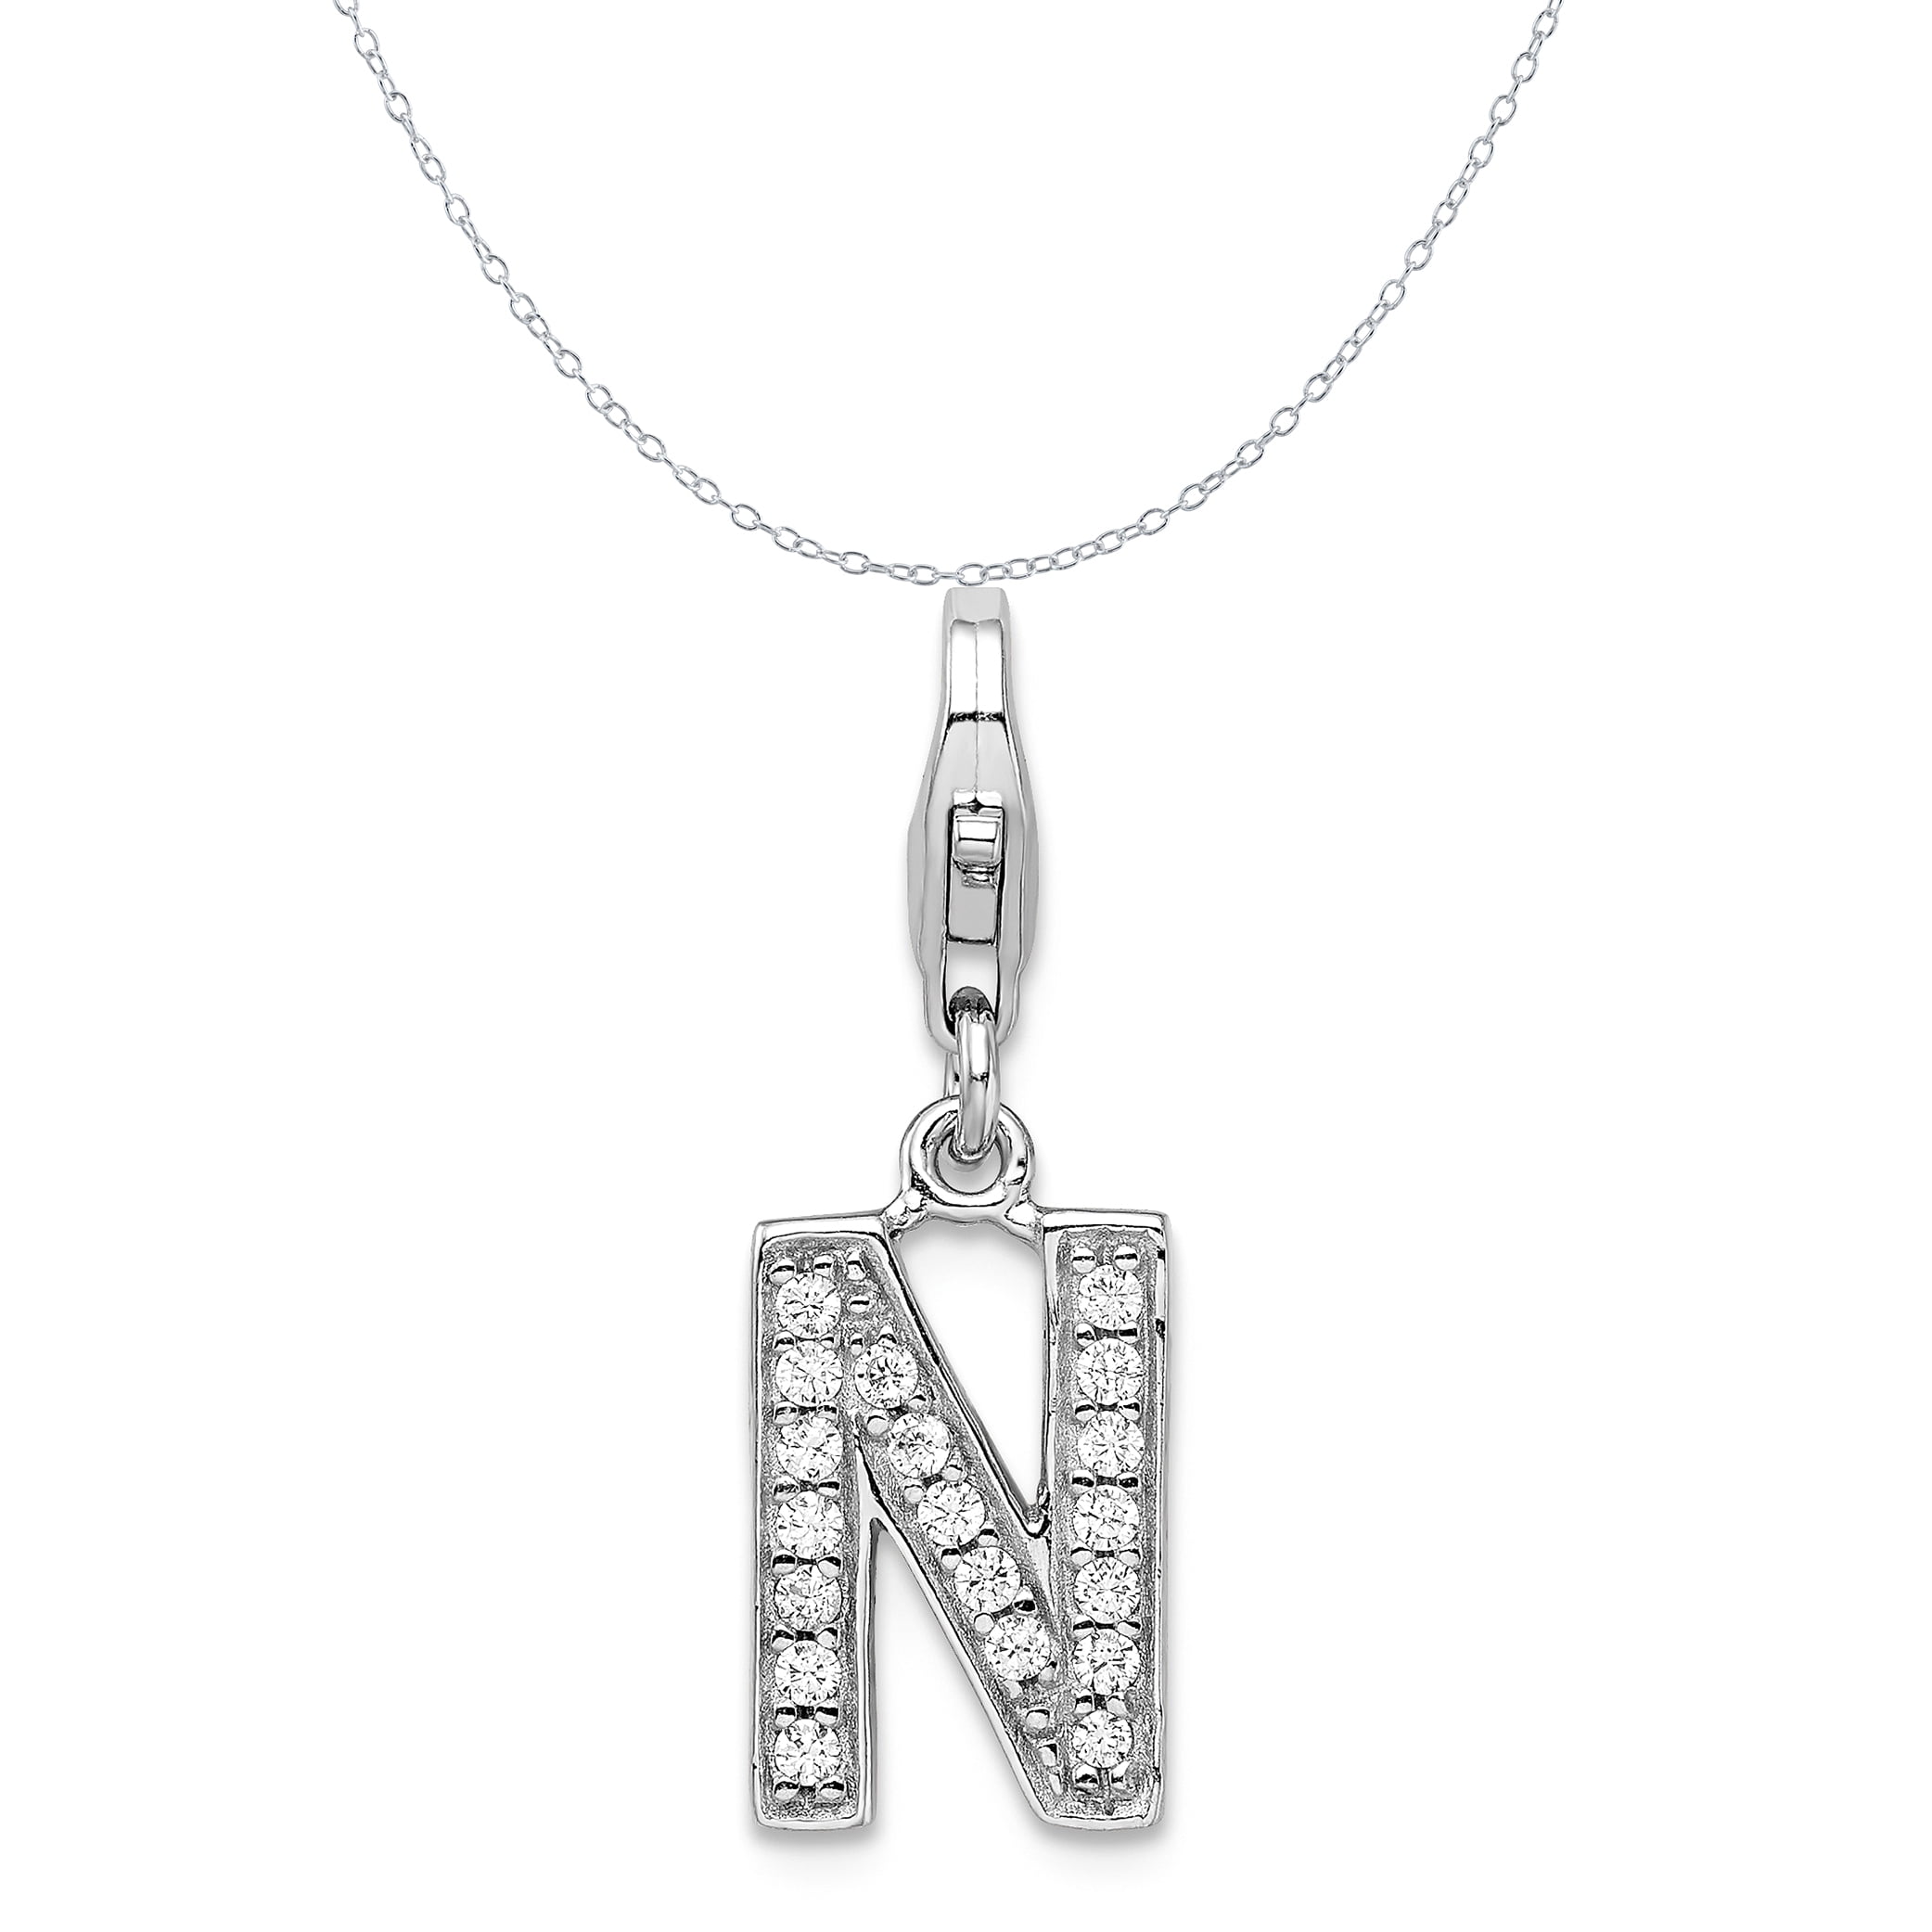 16-20 Mireval Sterling Silver Polished Clock Charm on a Sterling Silver Chain Necklace 